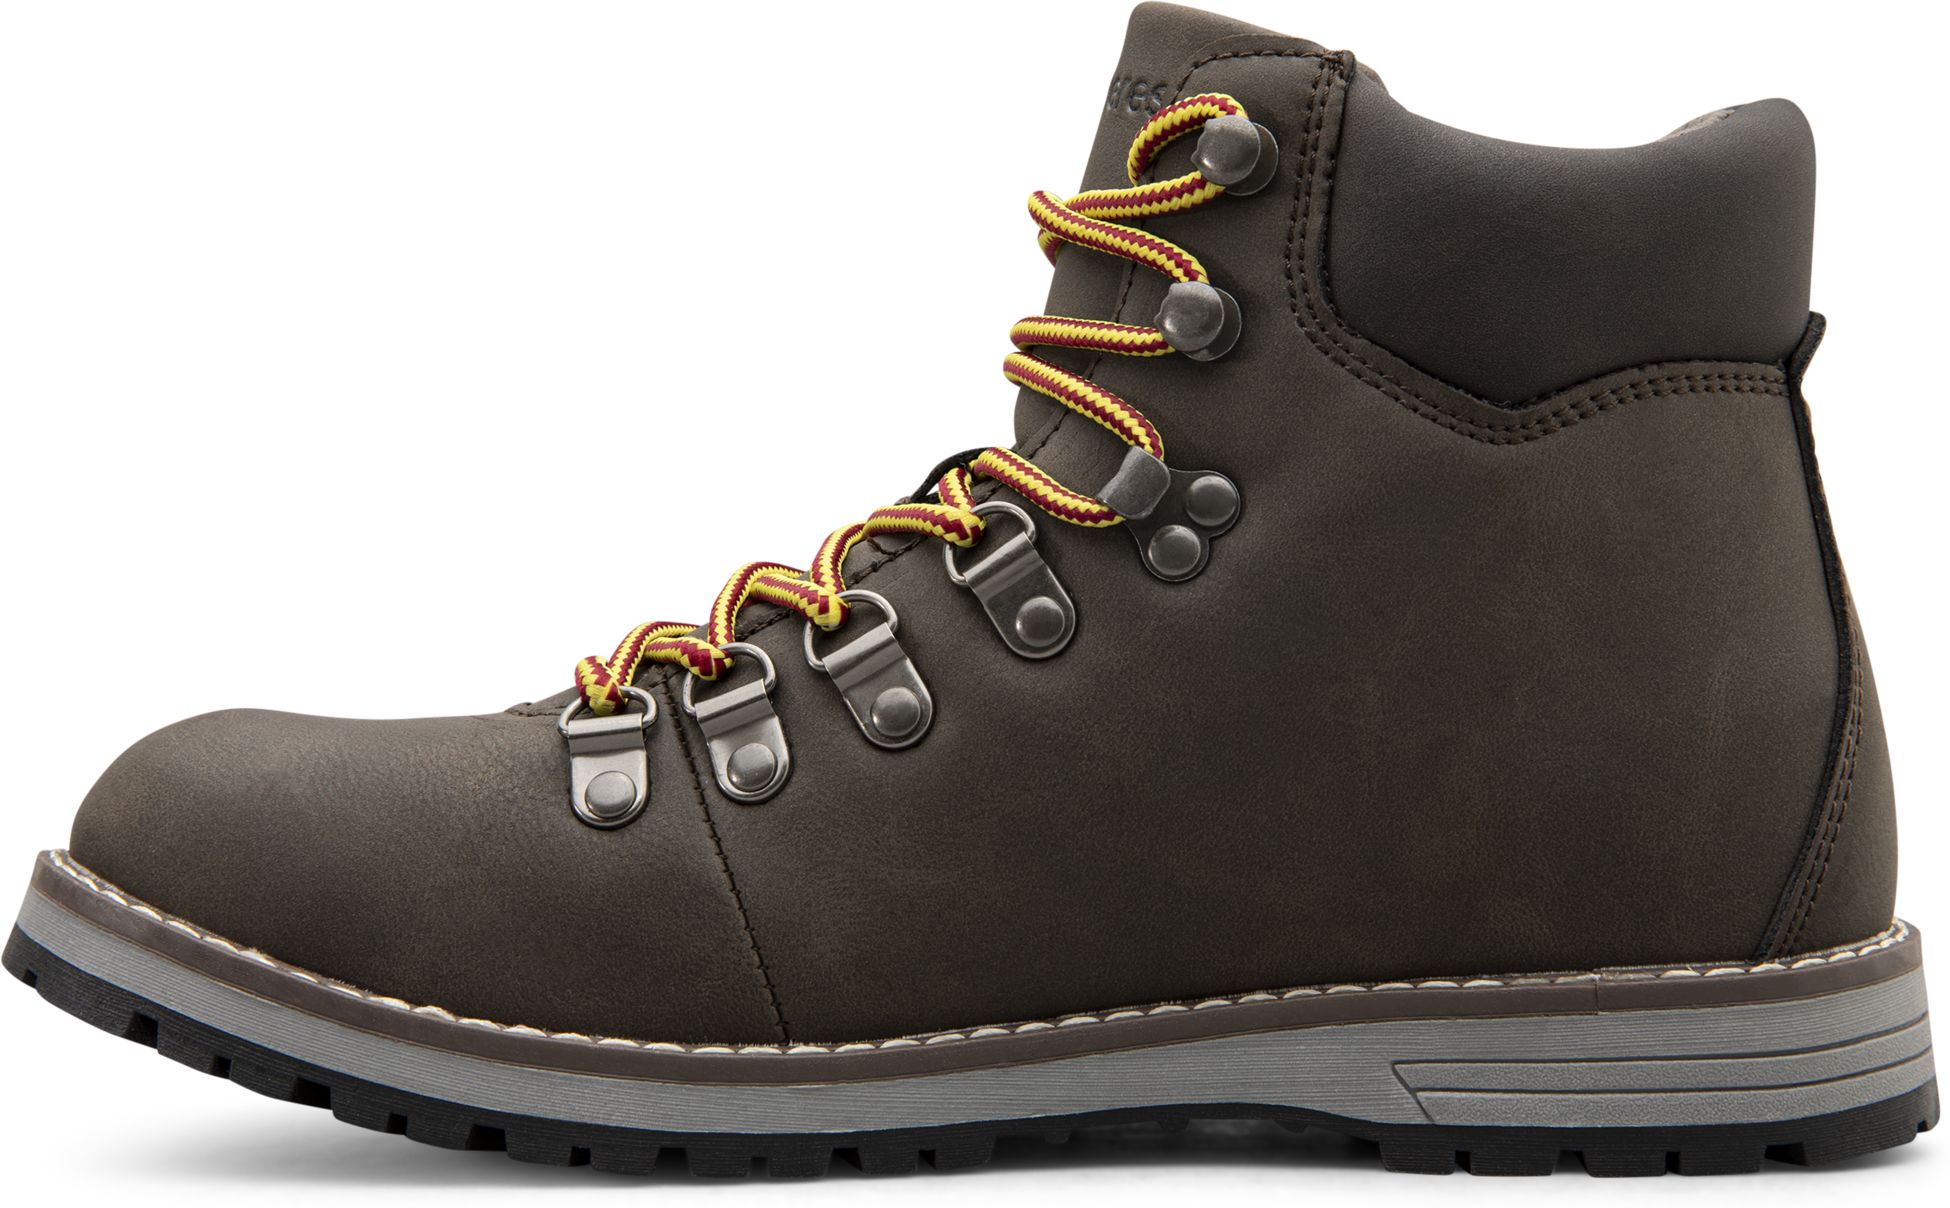 EVEREST, W STYLE HIKER BOOT